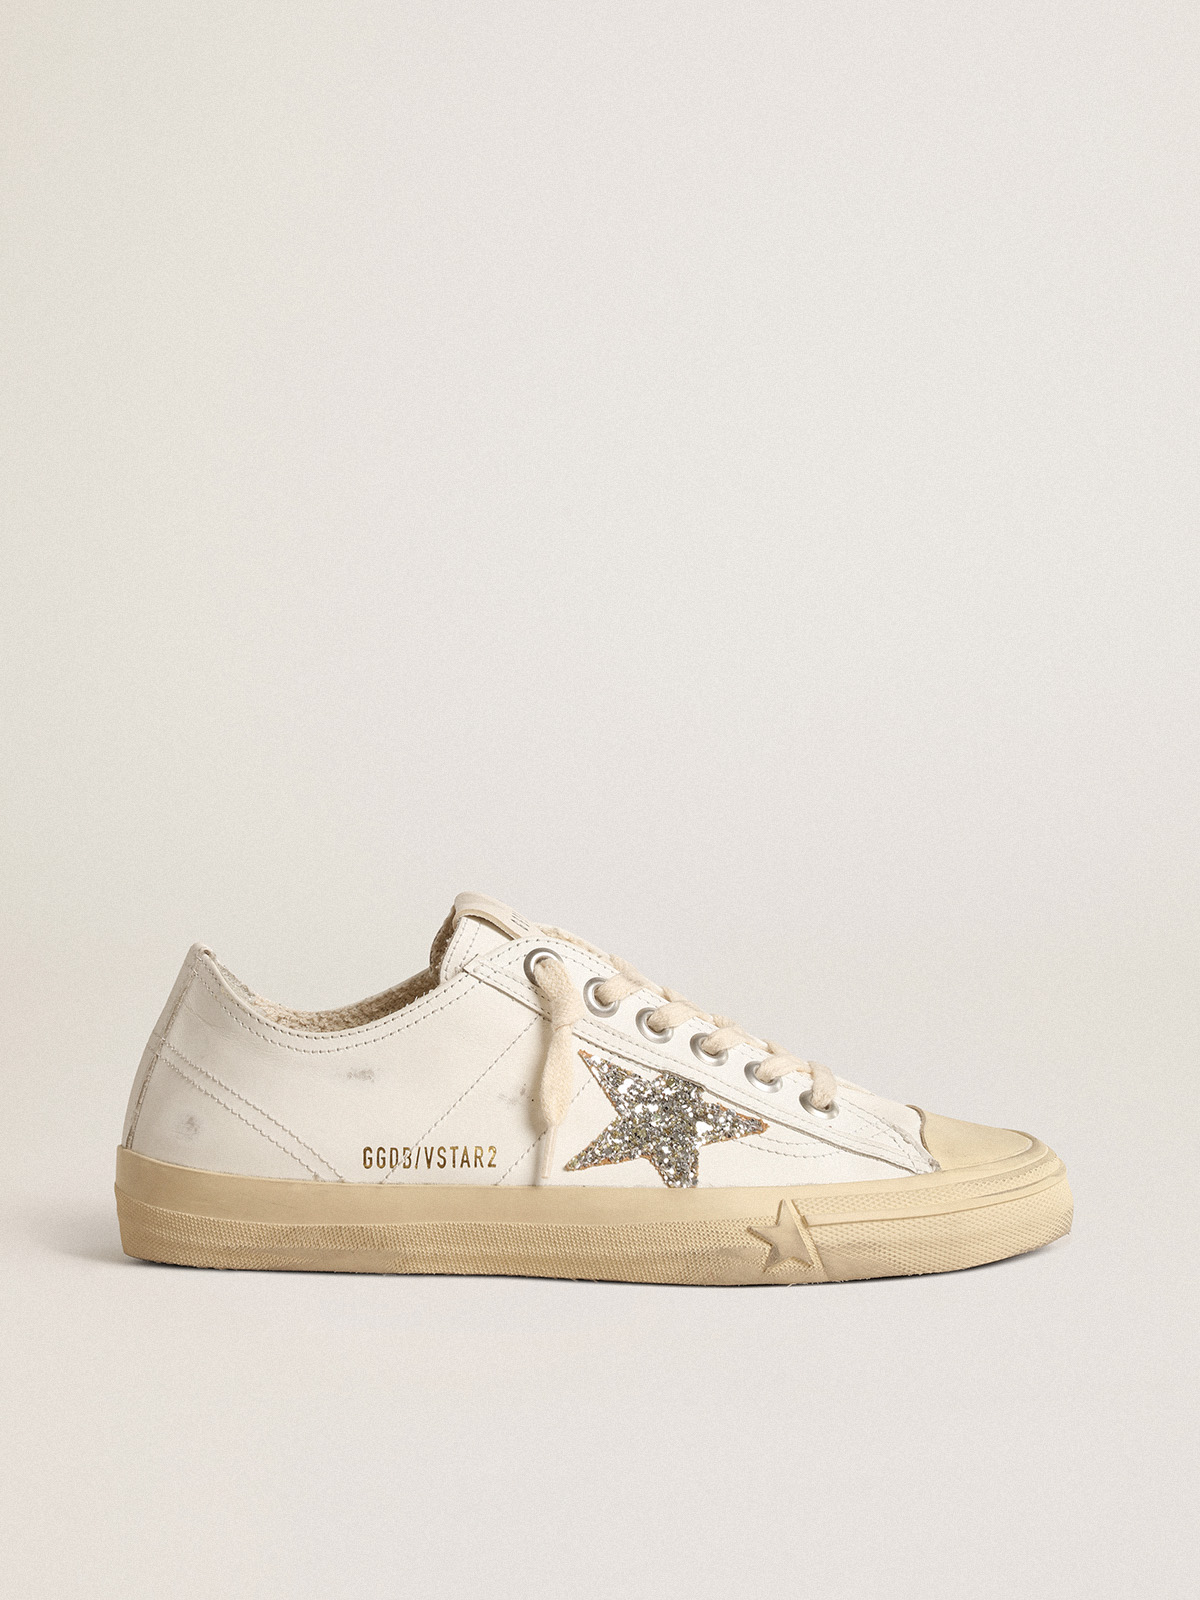 V-Star in white leather with a platinum glitter star | Golden Goose